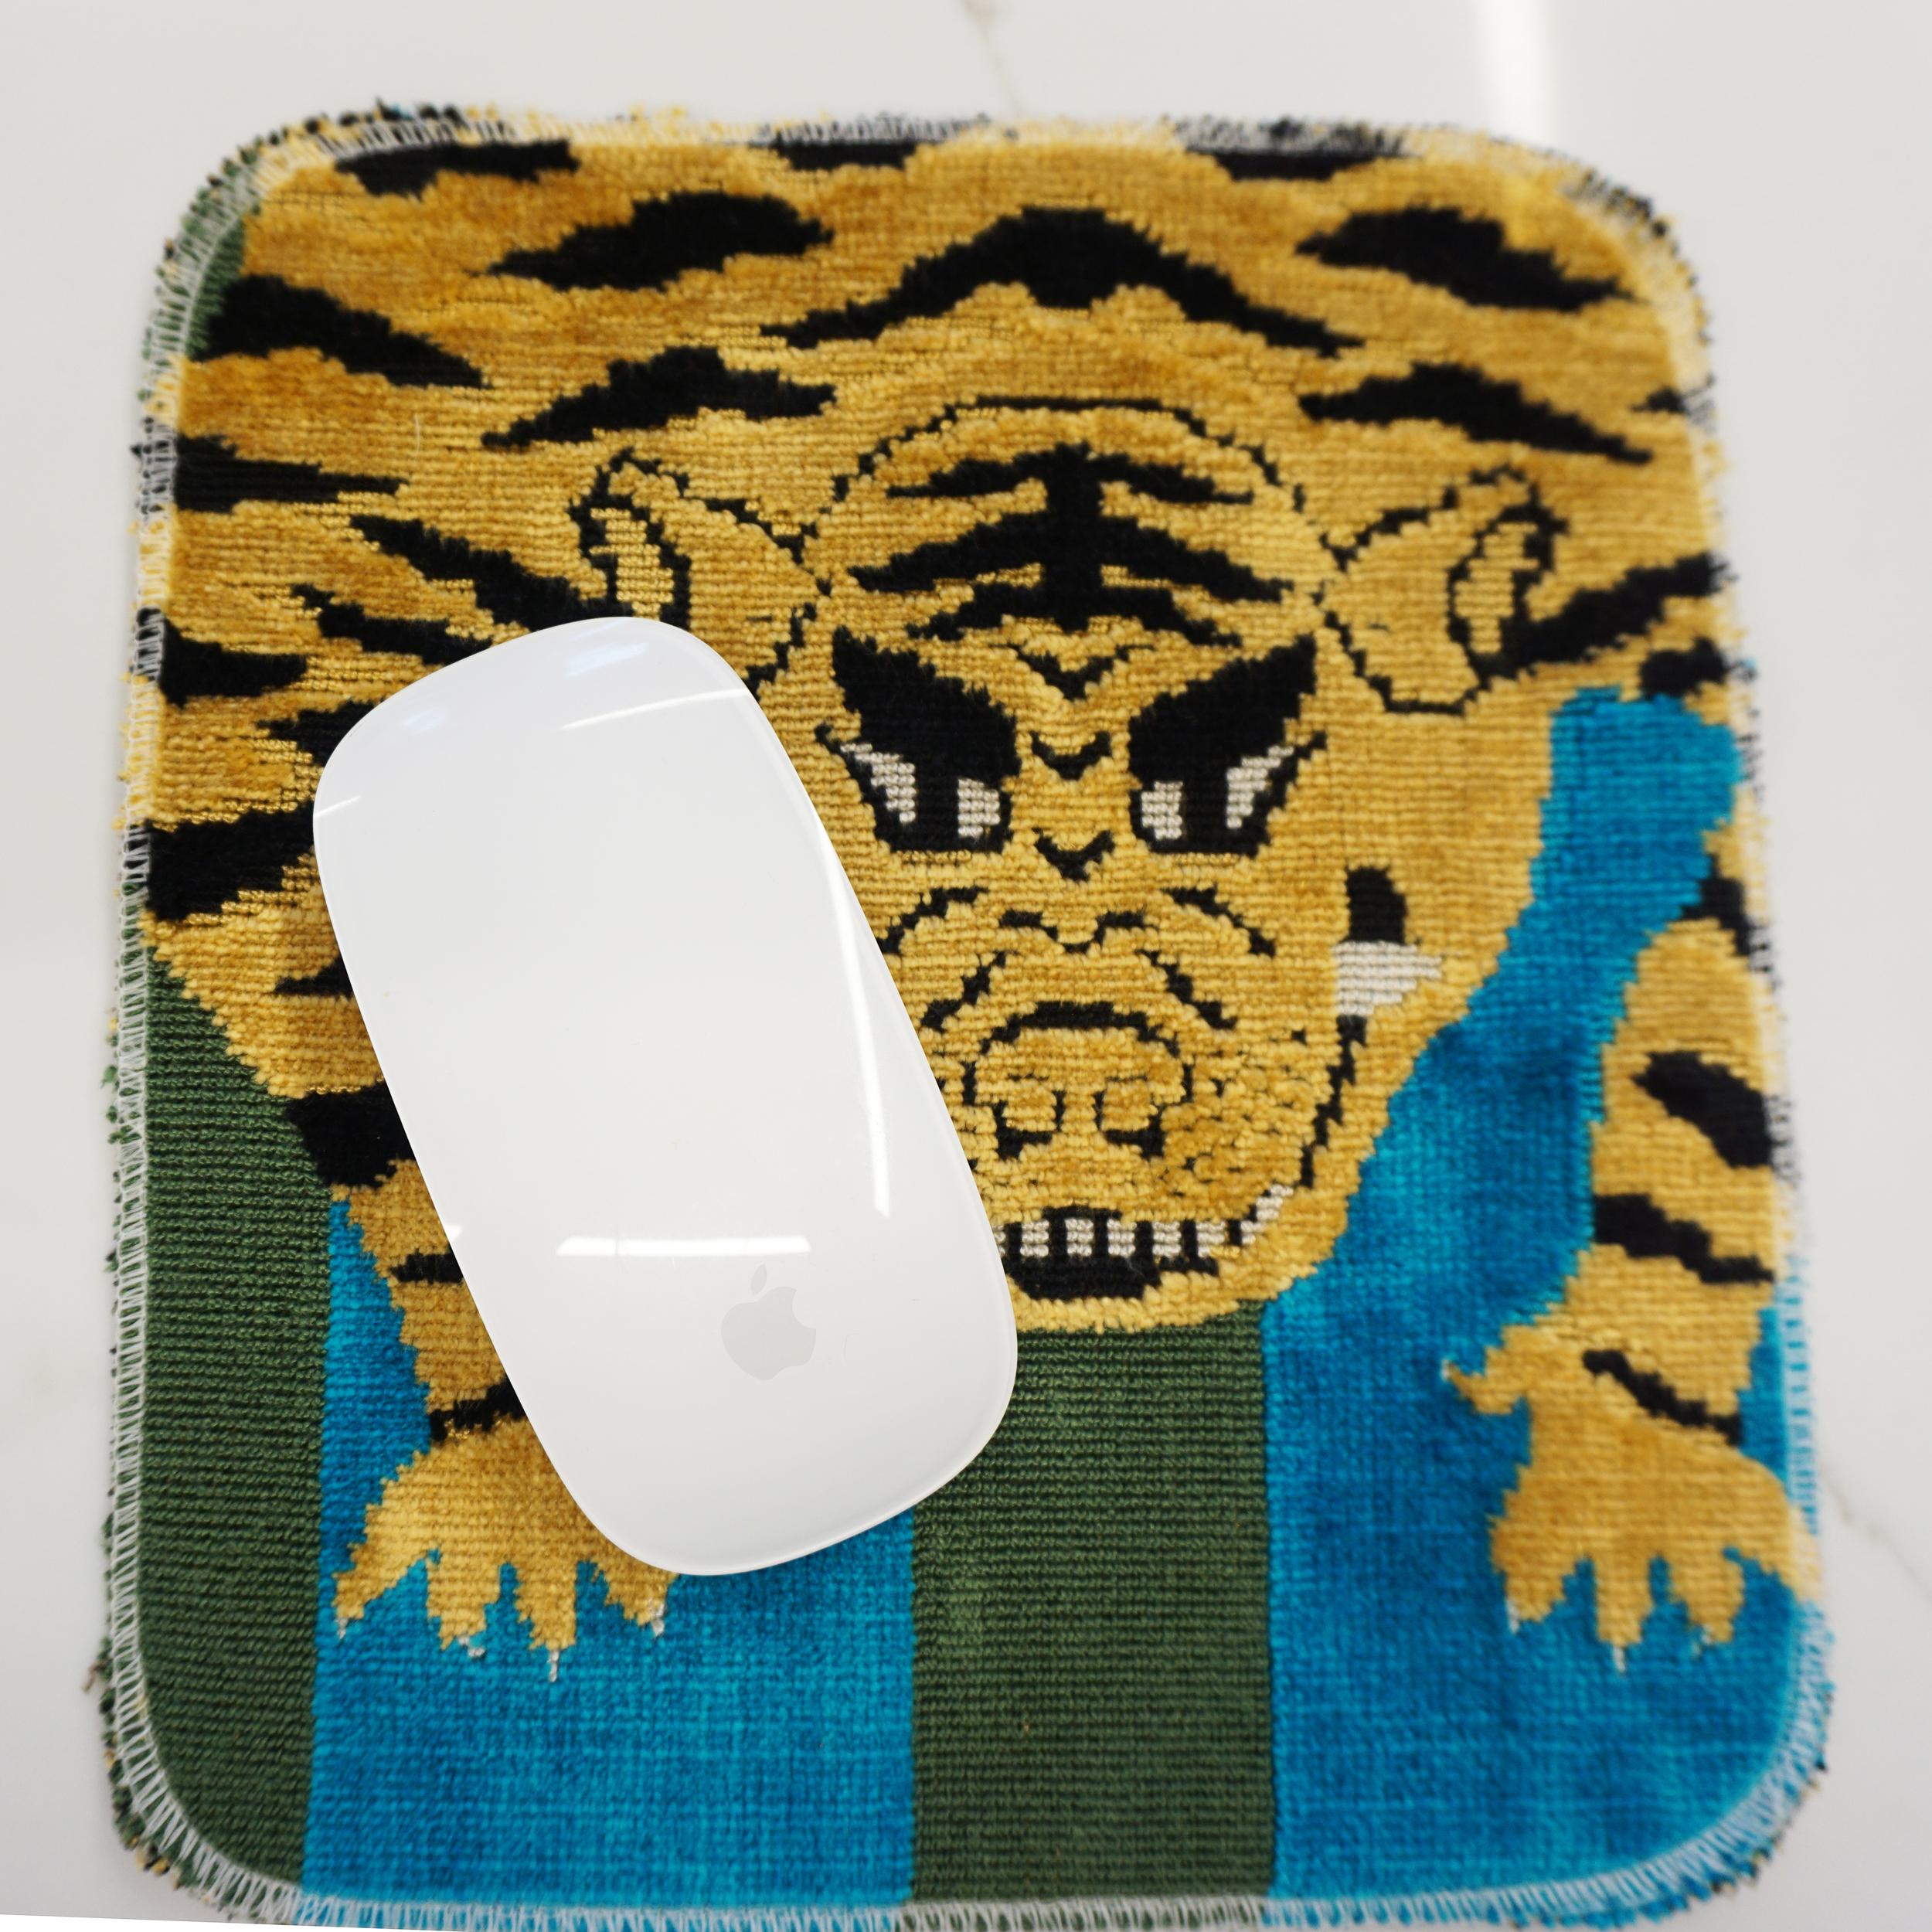 This bold and eclectic mat is made with Schumacher’s Jokhang Tiger Velvet fabric. It features a Tibetan tiger motif amidst a blue striped pattern background. We found that along with being a decorative element the mat works well as a mouse pad too.